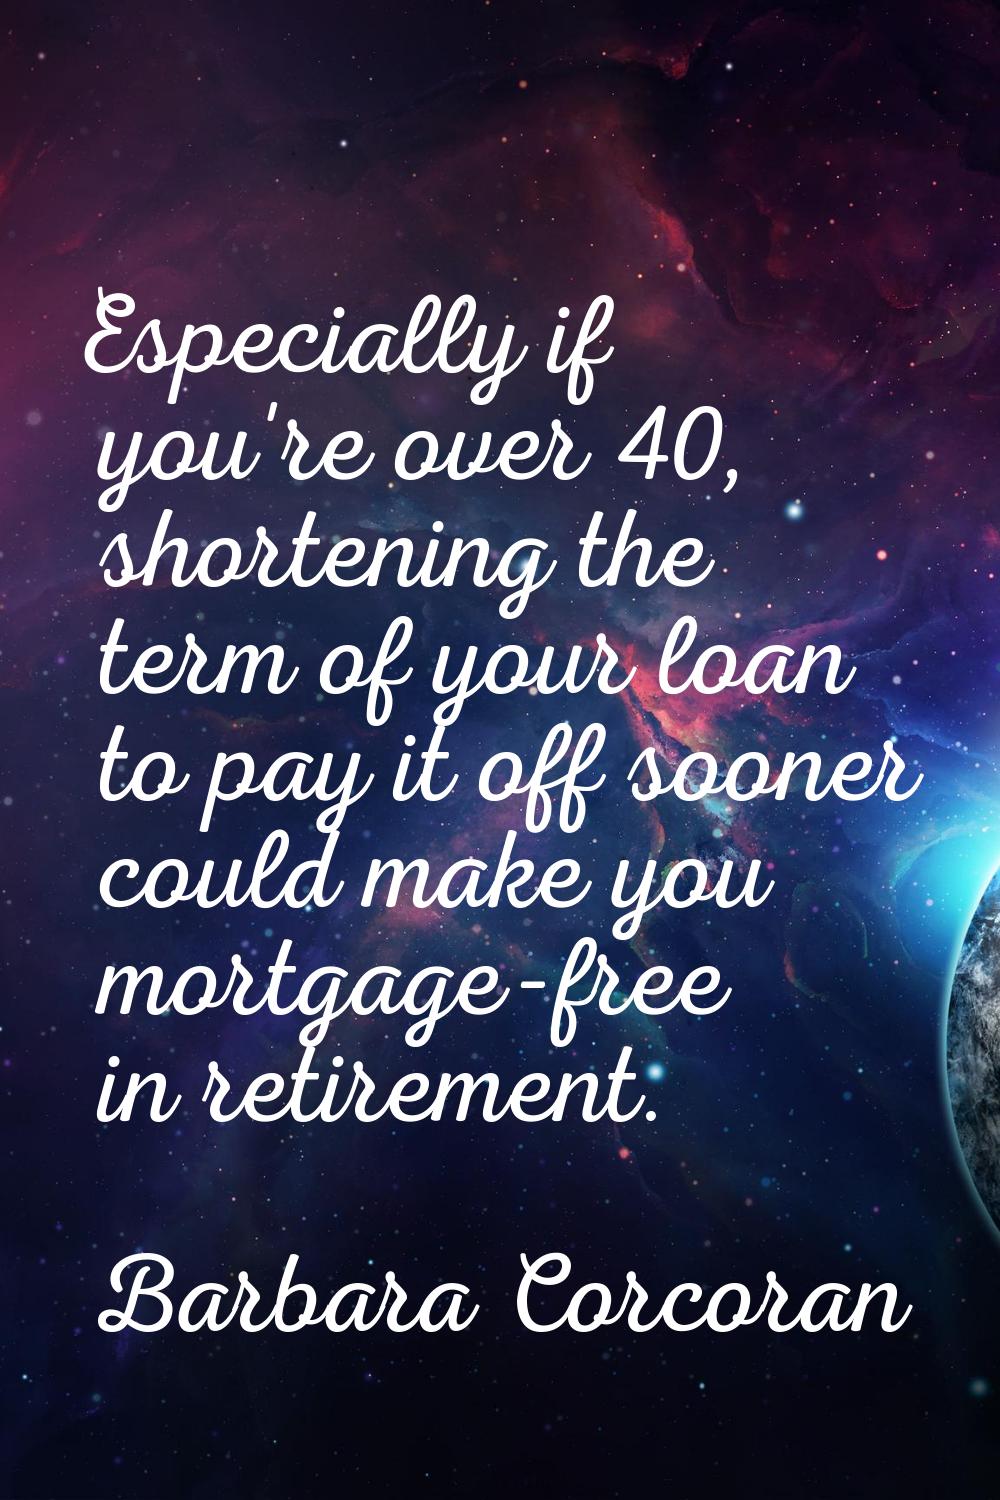 Especially if you're over 40, shortening the term of your loan to pay it off sooner could make you 